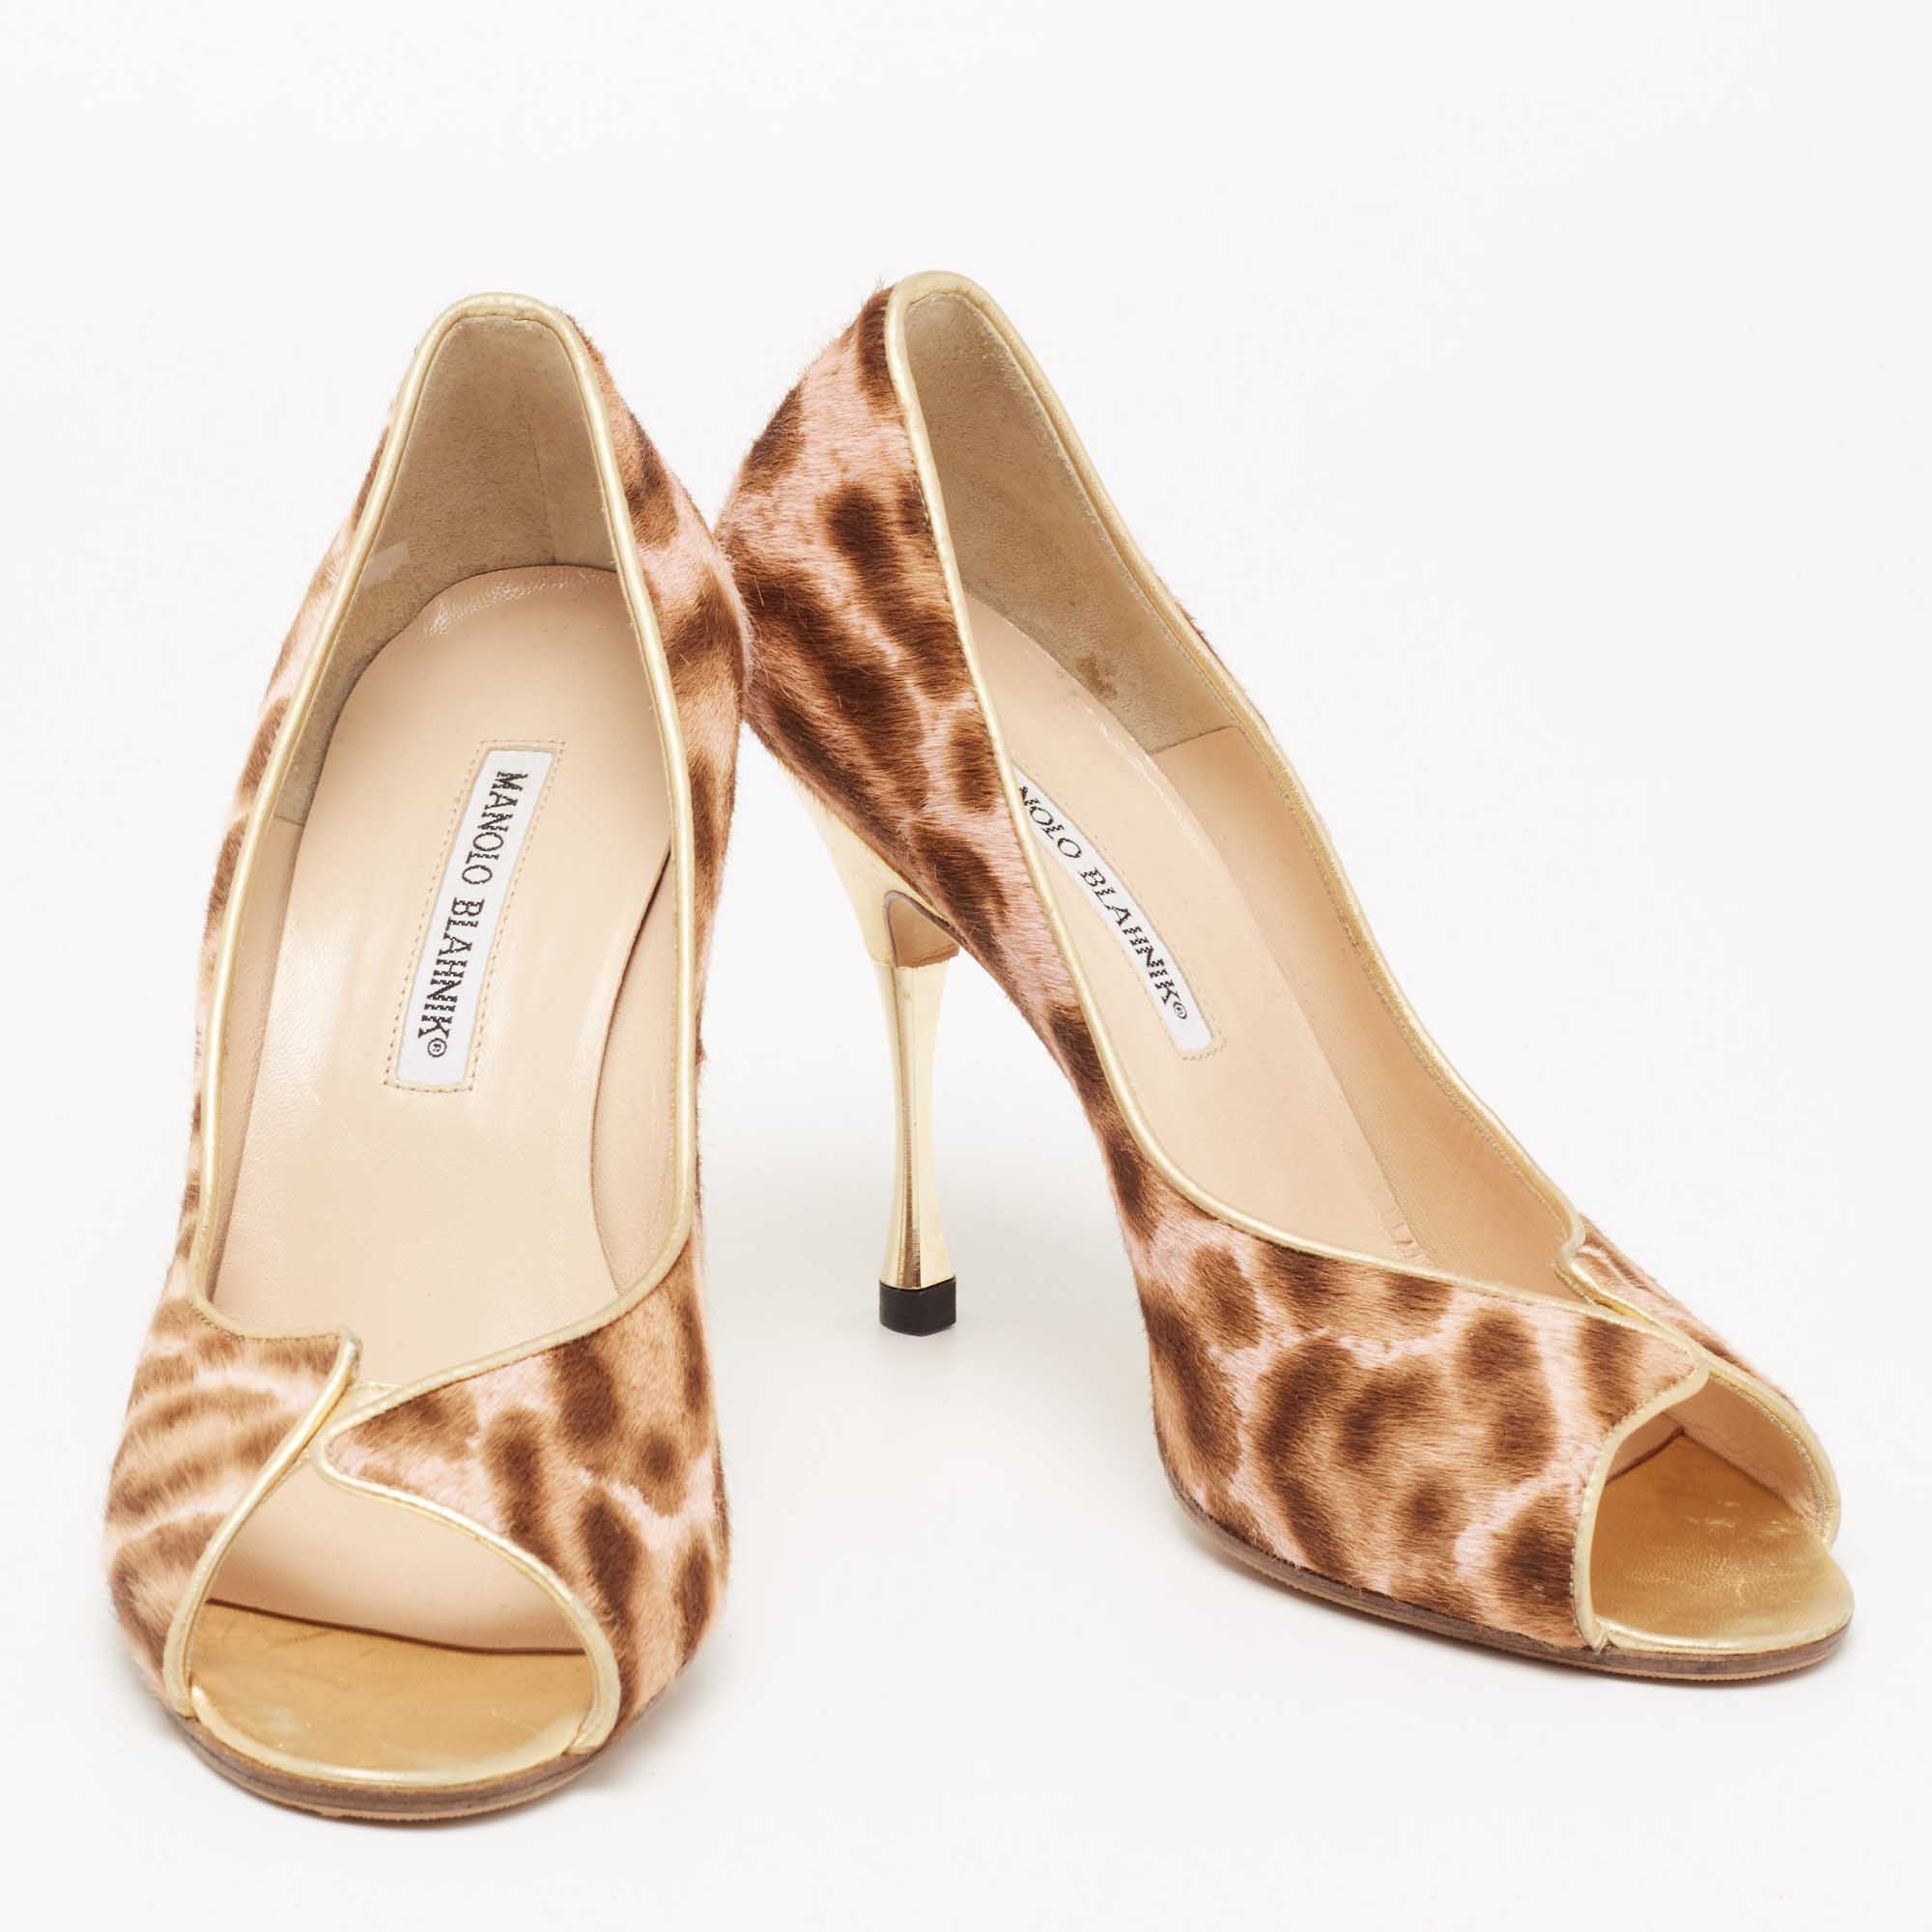 Manolo Blahnik Brown/White Calf Hair And Leather Peep Pumps Size 37.5